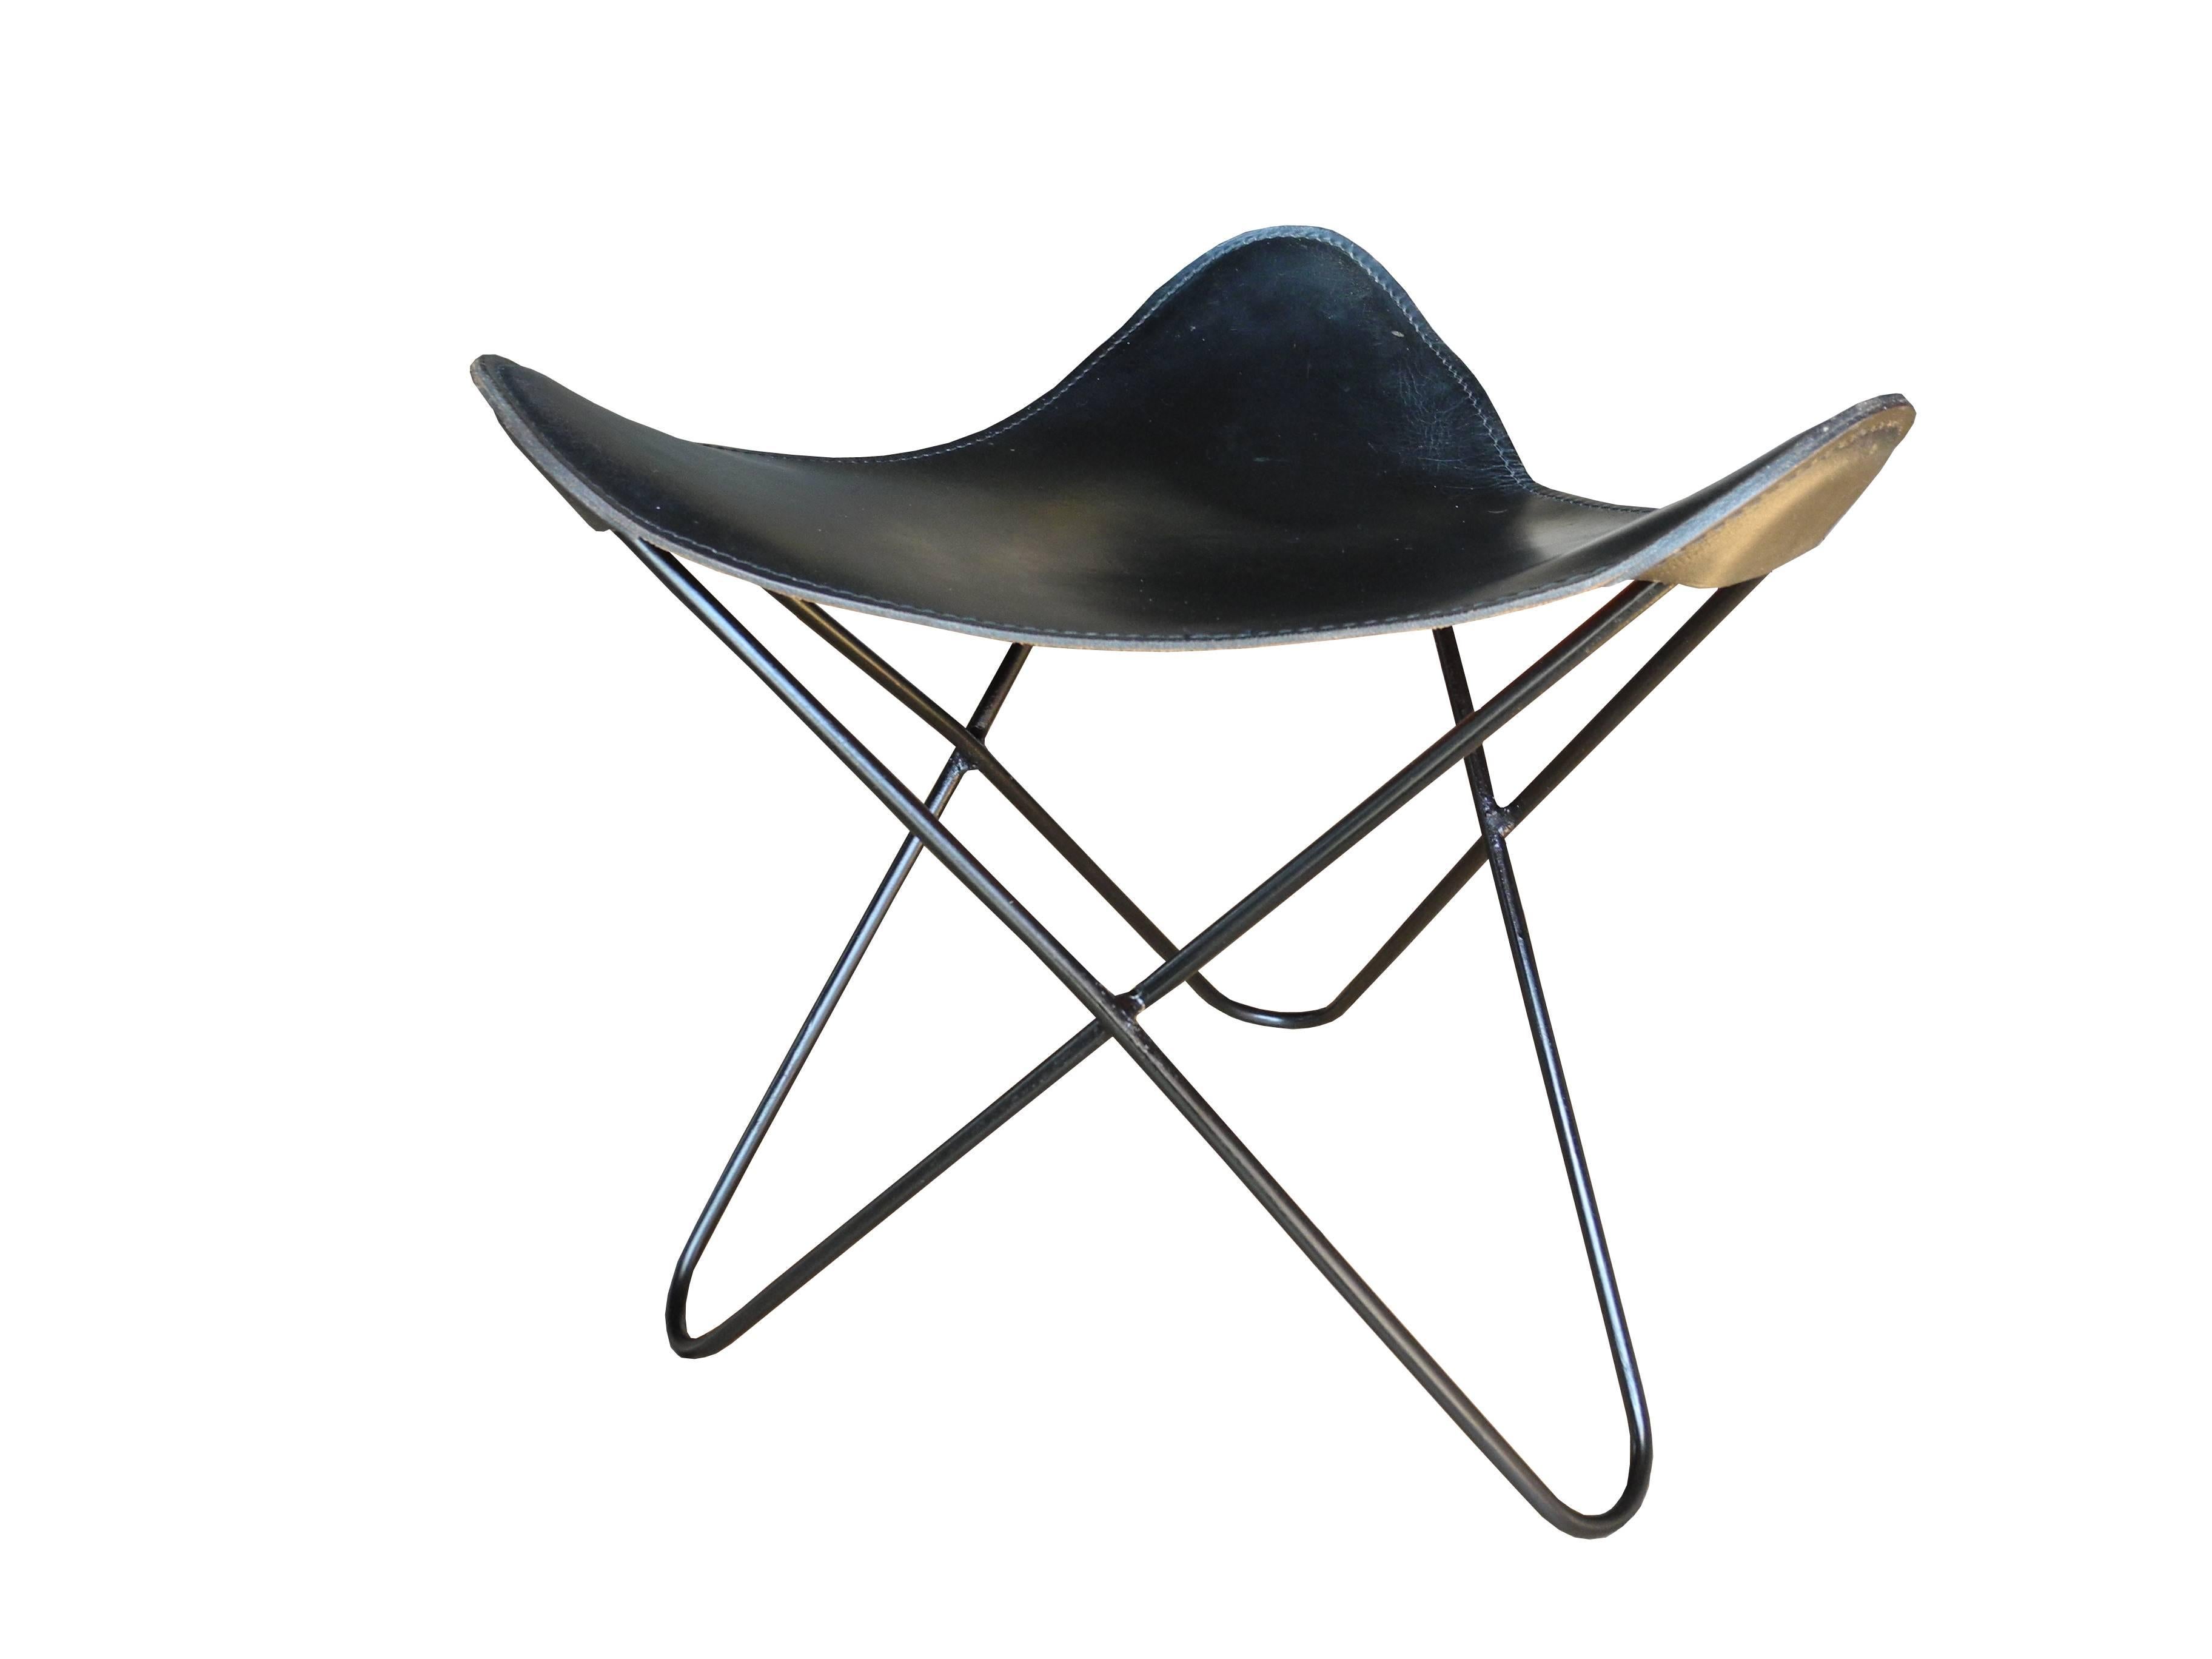 This simple welded steel stool has a saddle leather seat and is vintage American modern.
 